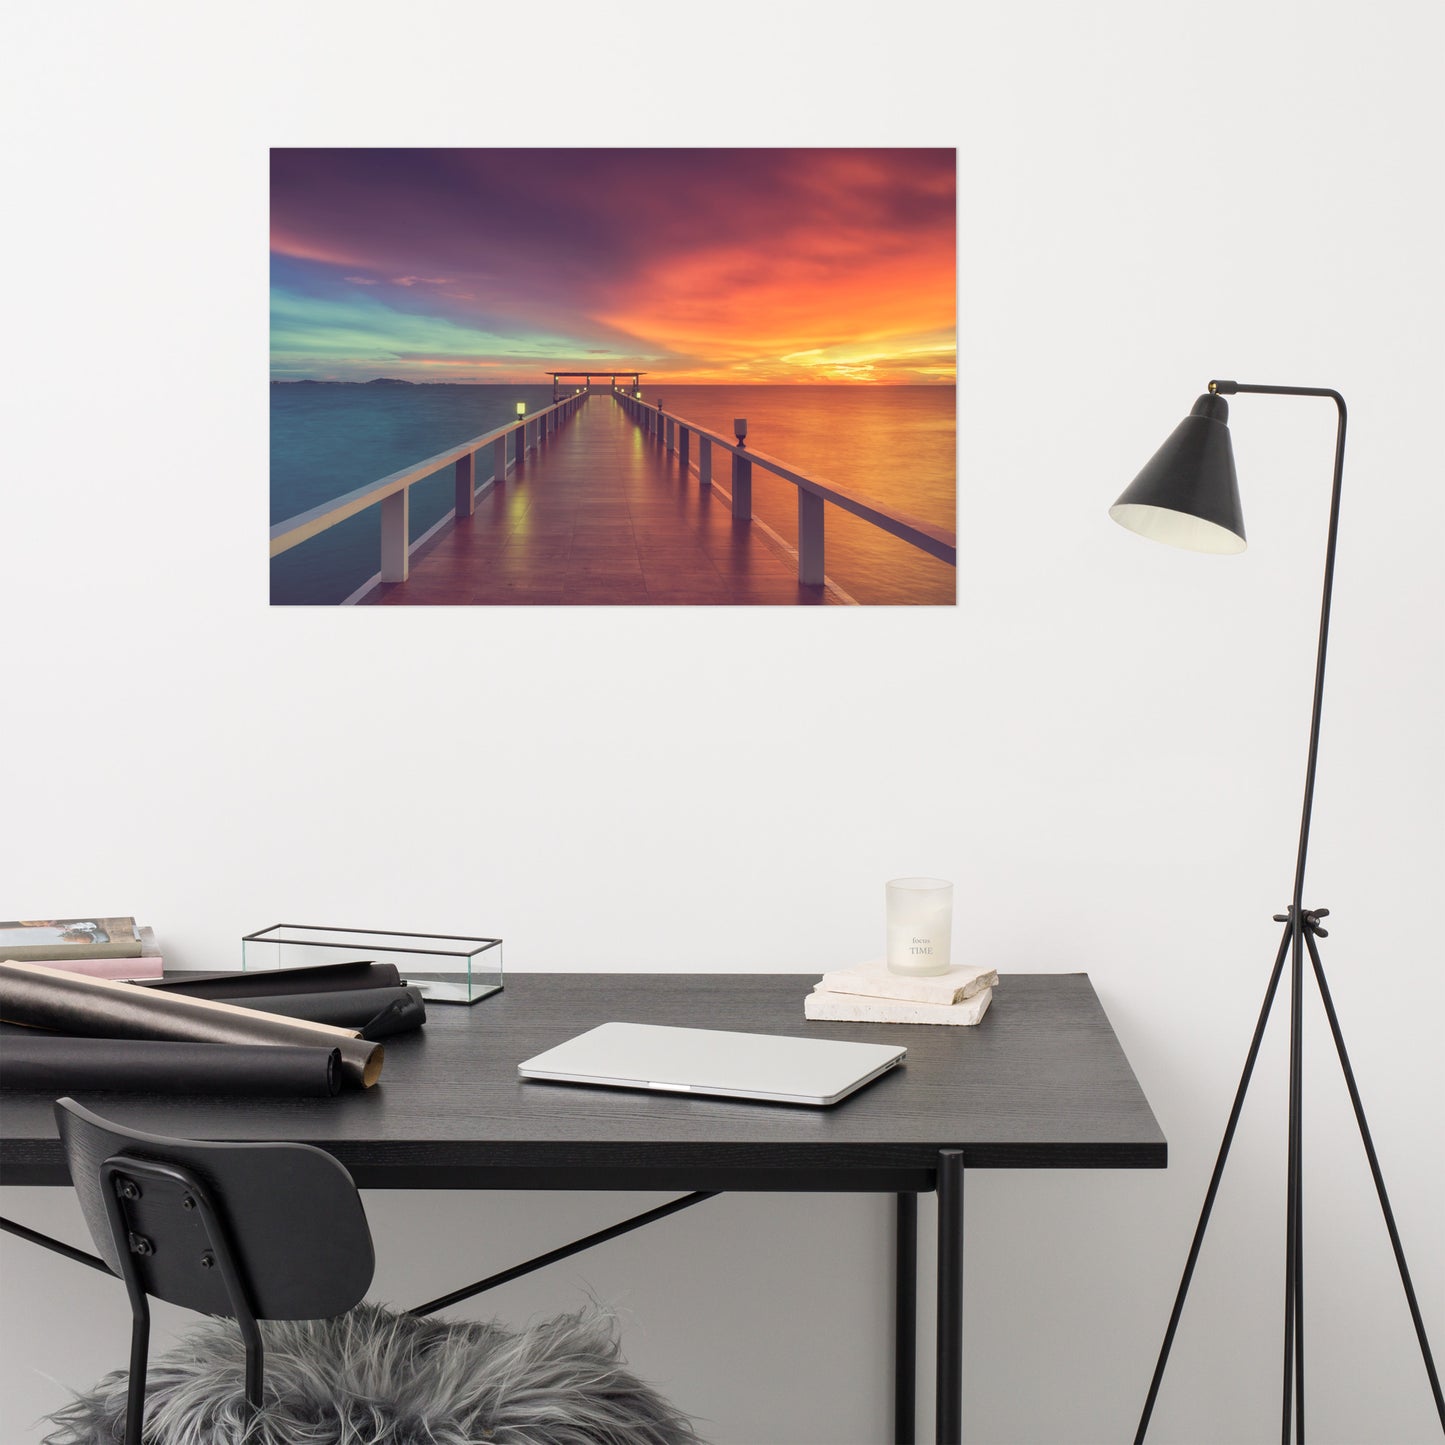 Modern Home Office Wall Decor: Surreal Wooden Pier At Sunset with Intrigued Effect Landscape Photo Loose Wall Art Prints